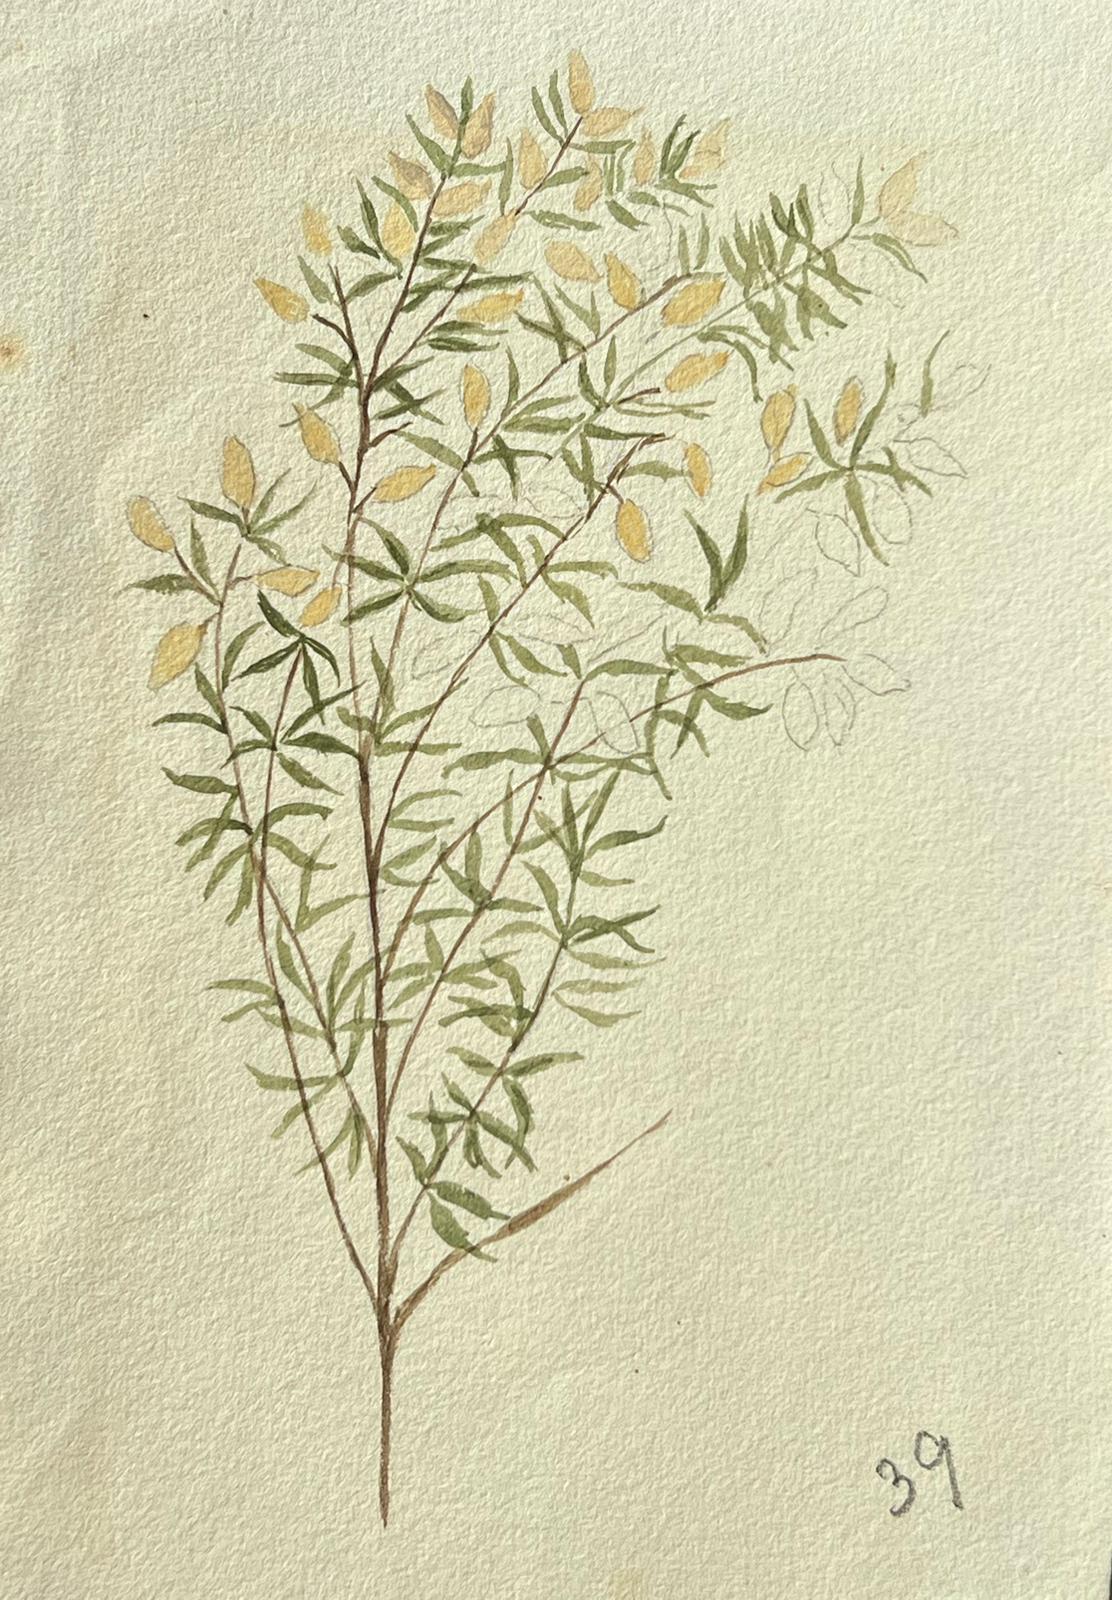 Very fine original antique English botanical watercolour paintings depicting this beautiful depiction of a flower/ plant. The work came to us from a private collection in Surrey, England and had been part of an album of works assembled by the artist